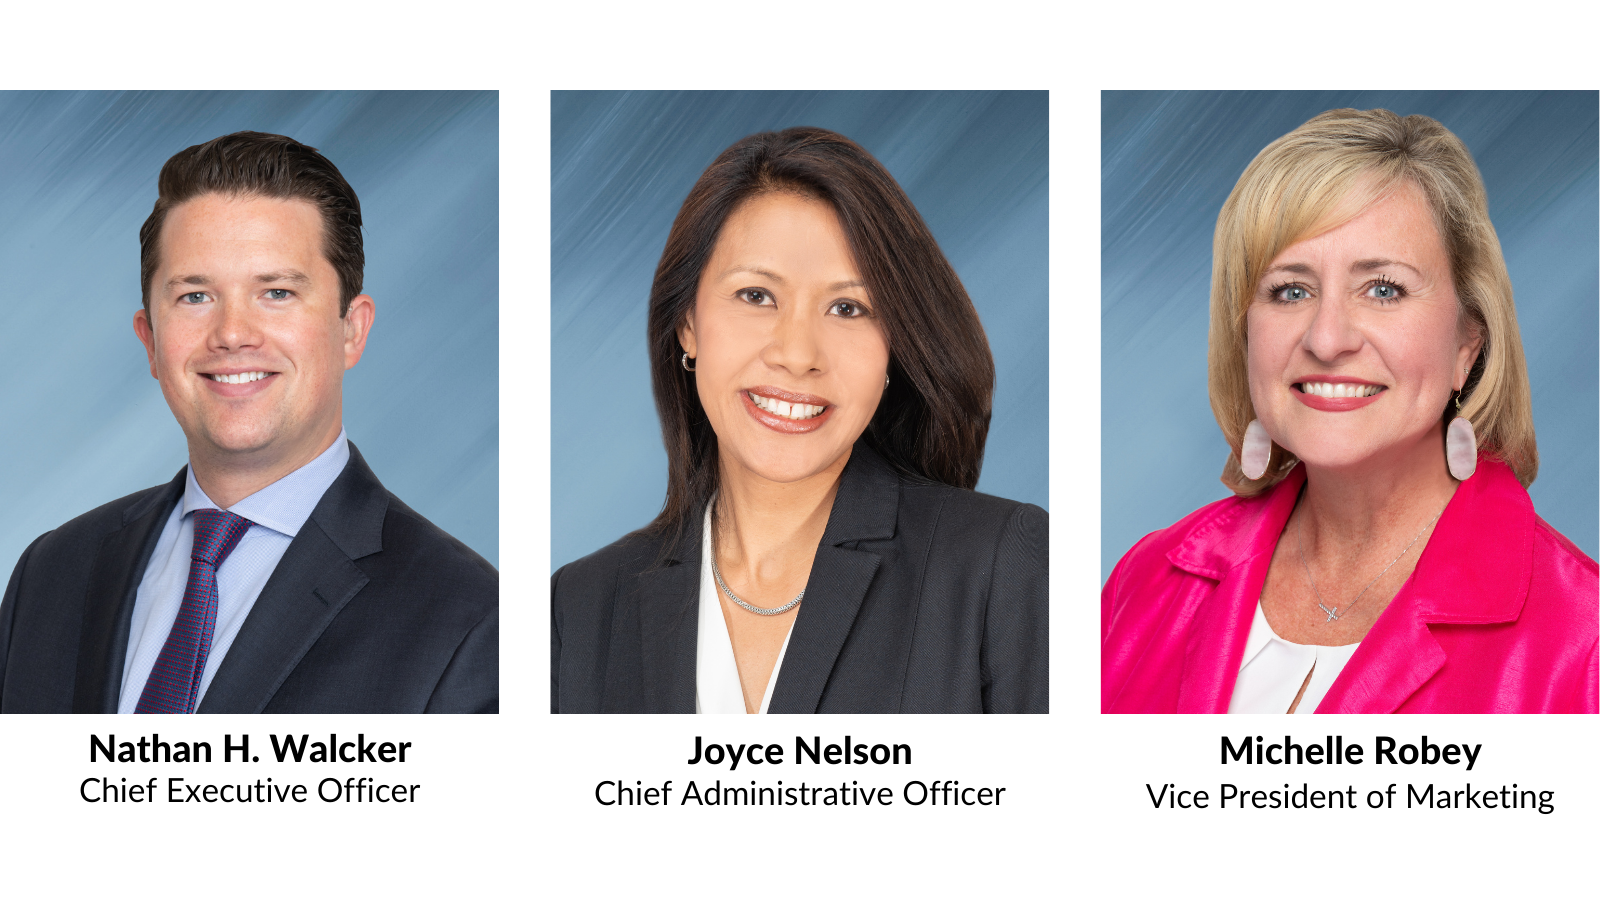 Chief Executive Officer Nathan H. Walcker; Chief Administrative Officer Joyce Nelson; Vice President of Marketing Michelle Robey